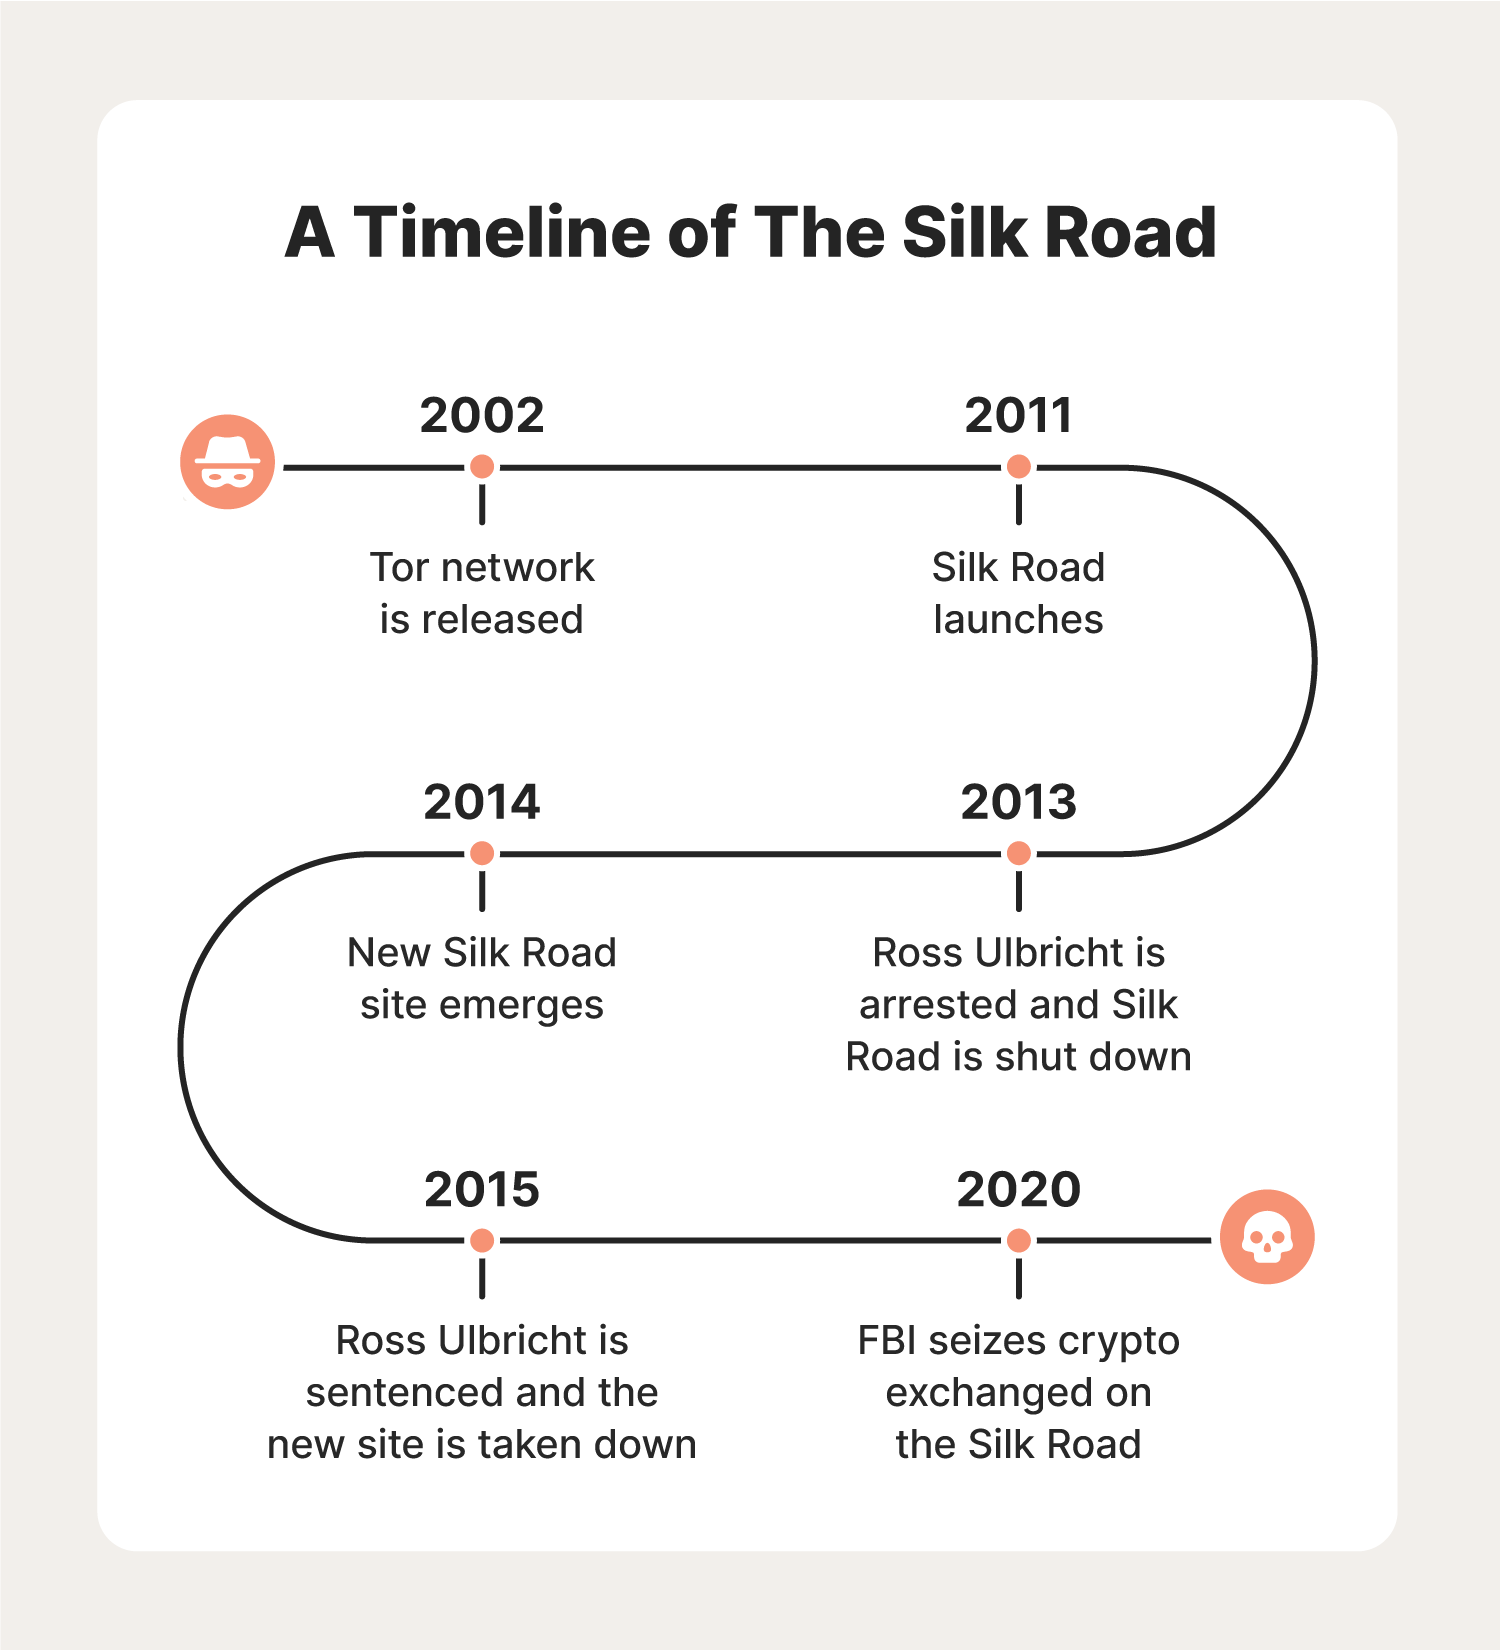 A timeline of important events throughout the history of the Silk Road.